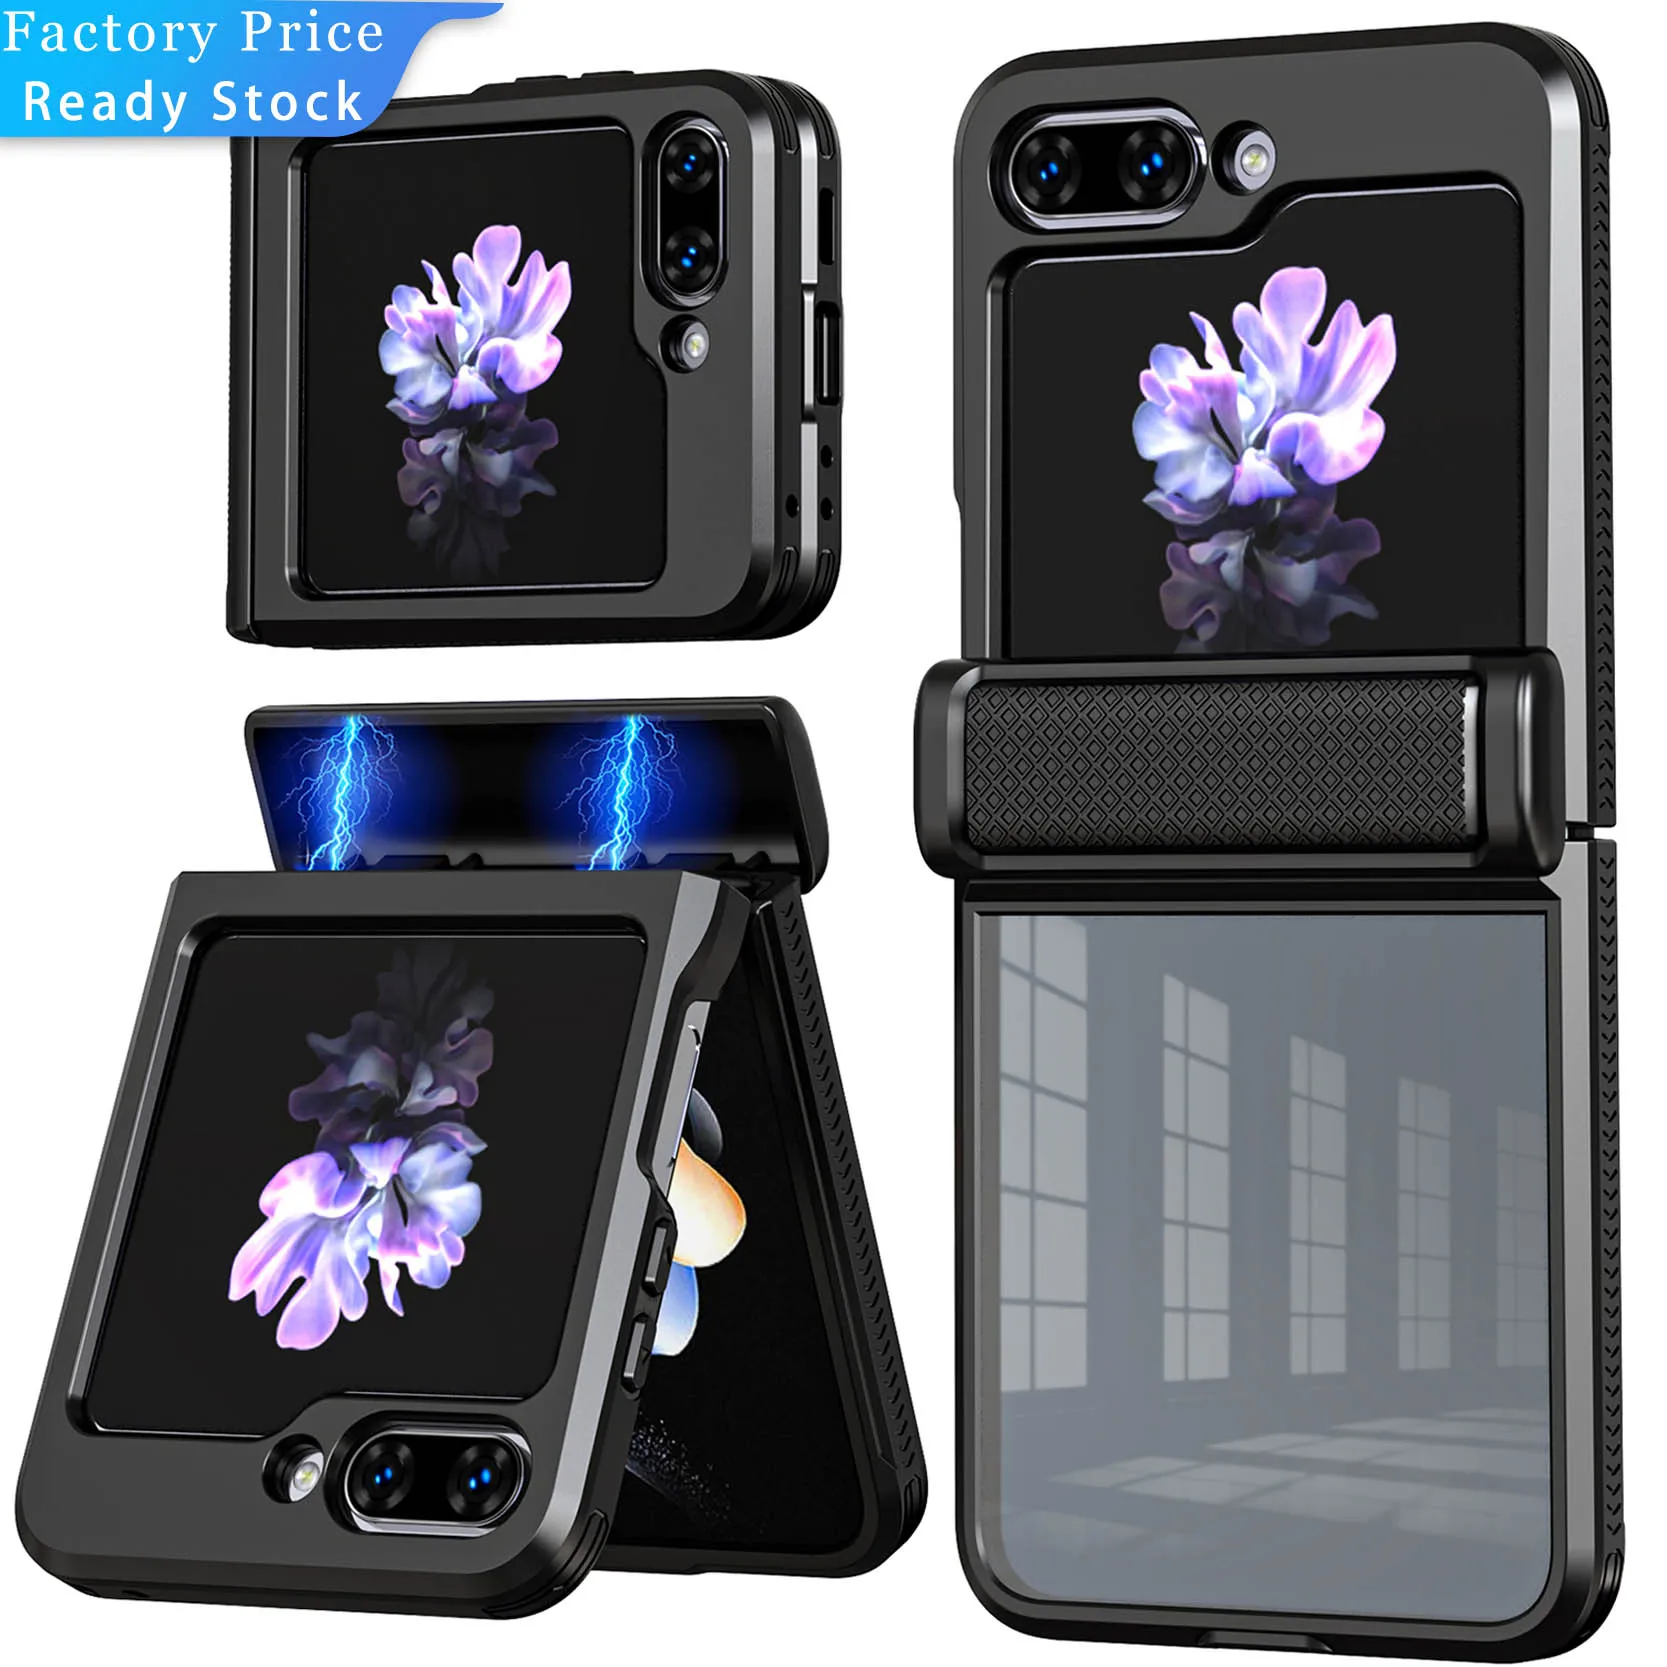 

New Arrival Case For Samsung Galaxy Z Flip 5 5G Case Clear Phone case With Rebound Hinge and Tempered Glass Lens